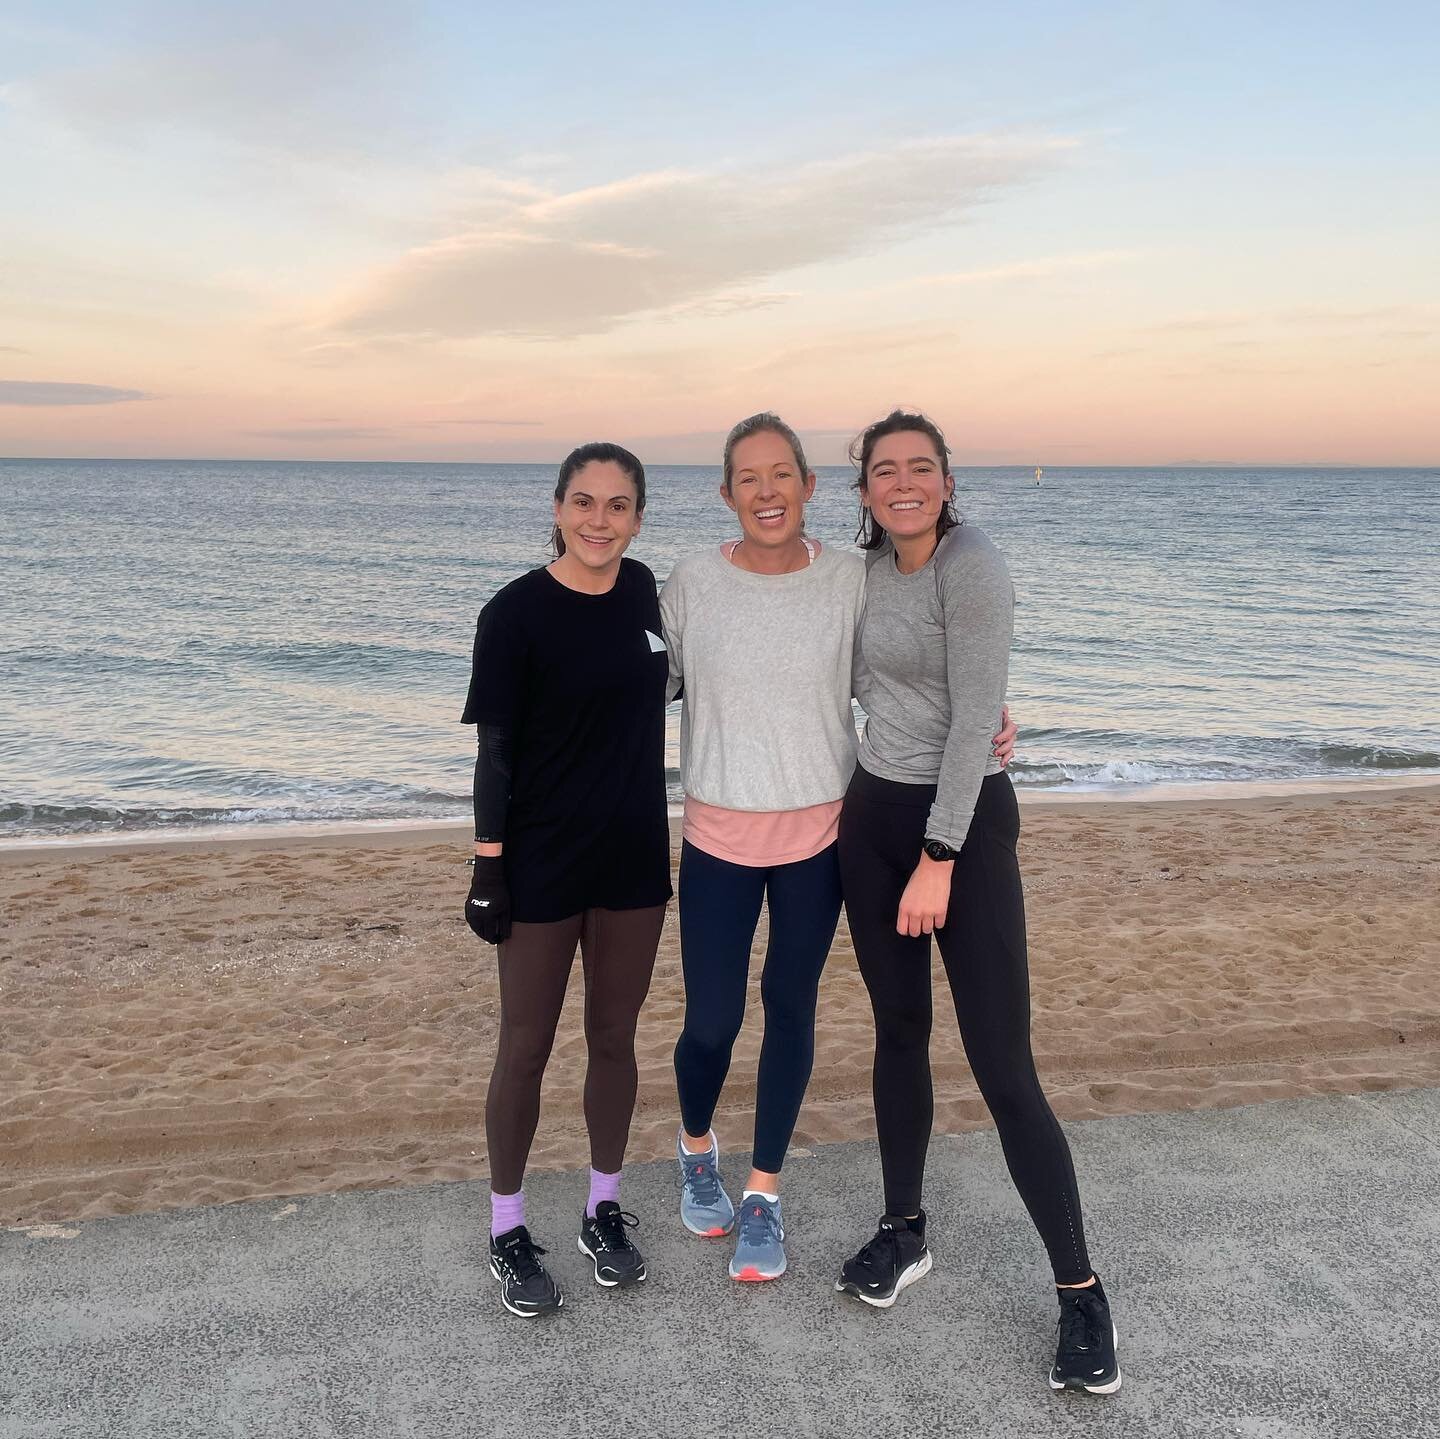 &bull; M V M T &bull; R U N &bull;
Has started! A few clients are wanting to add some running to their routine so we have created a fun MVMT run club. 

This group is about getting some great people together for a fun and social run, have an easy mee